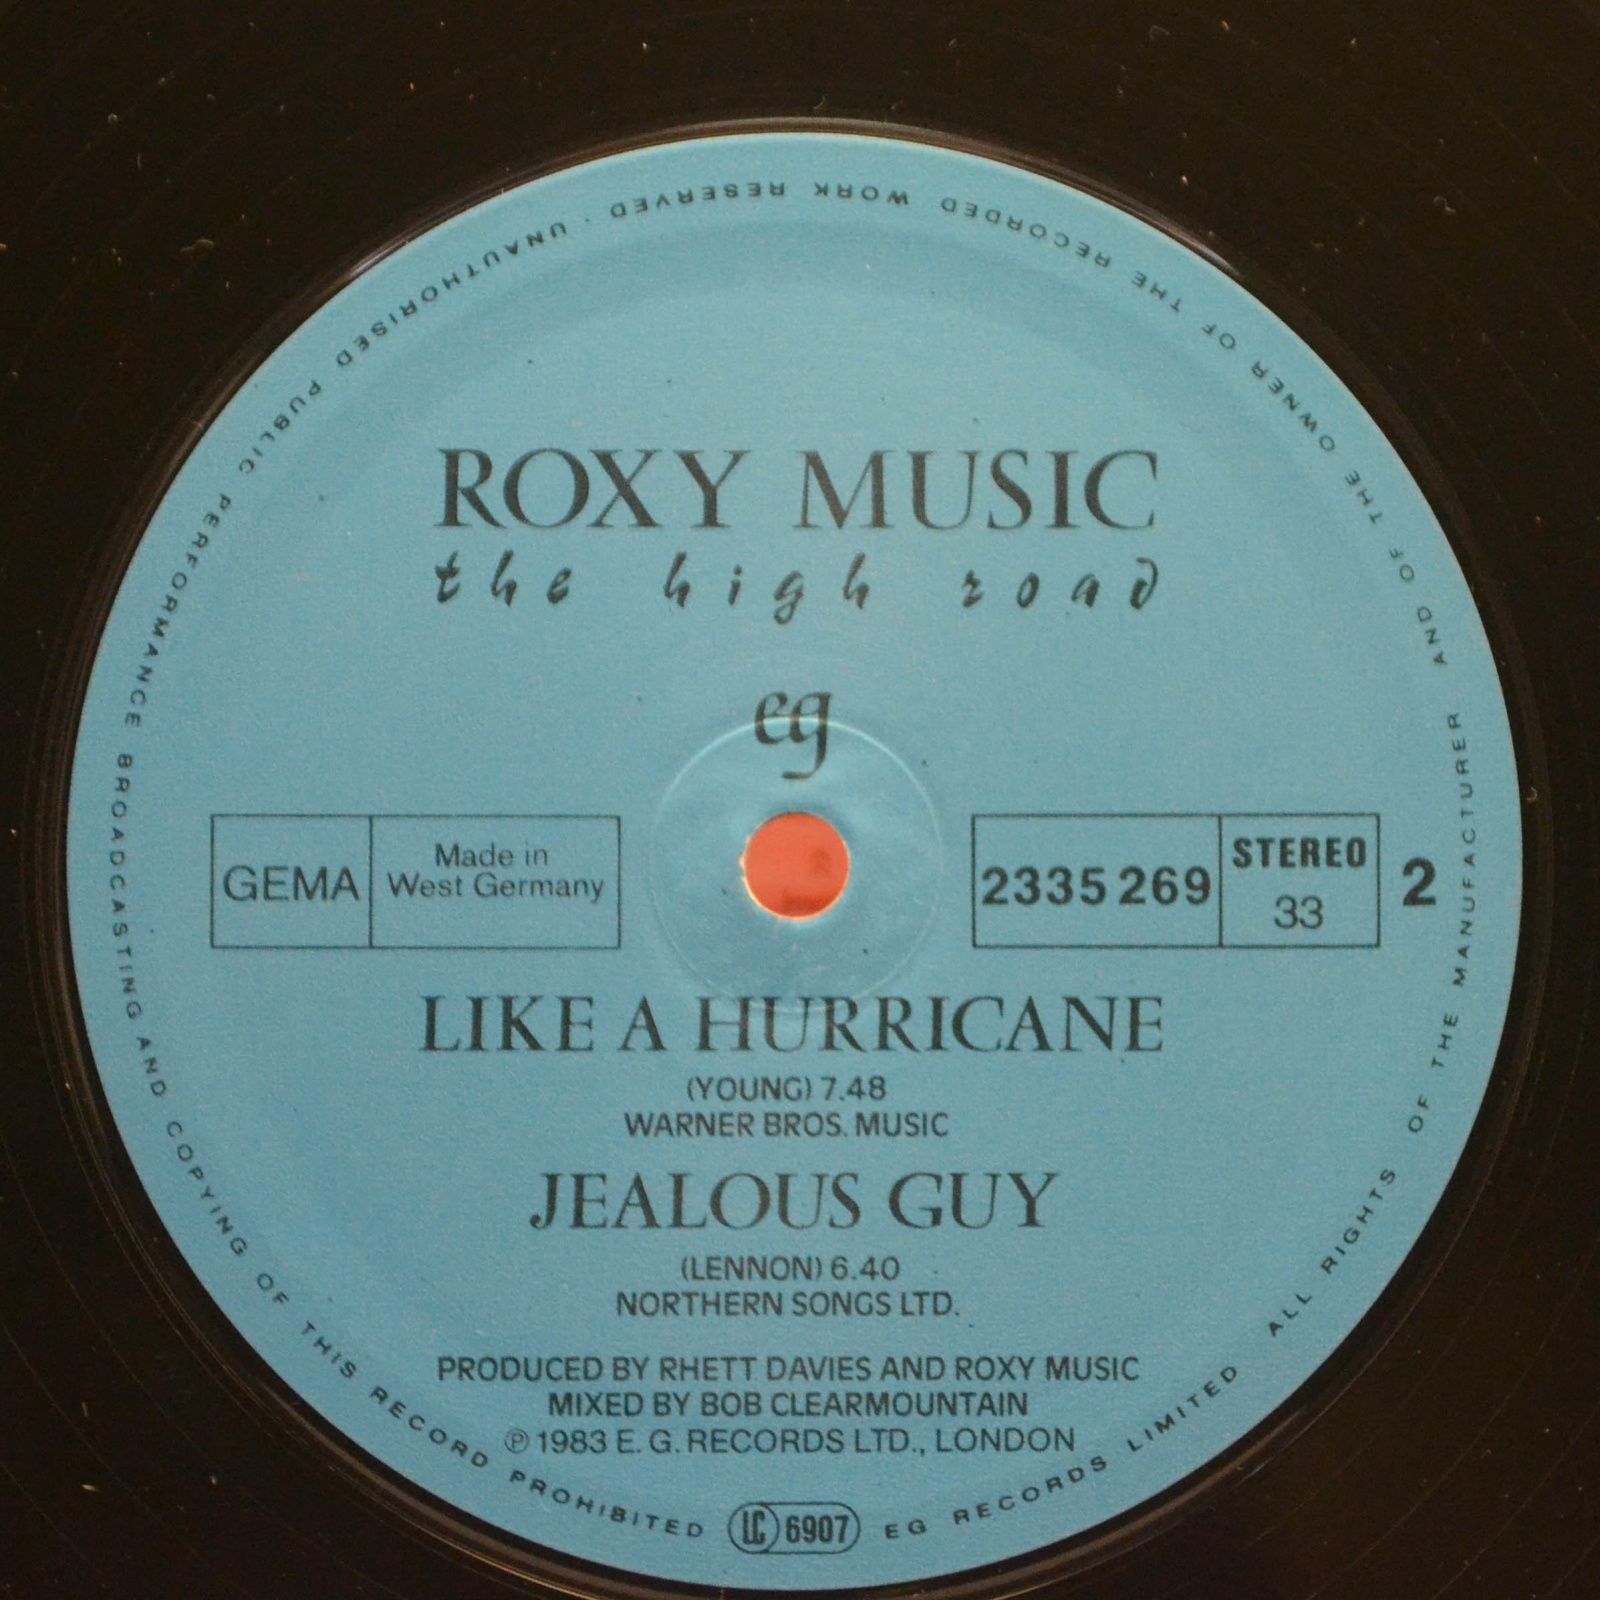 Roxy Music — The High Road, 1983